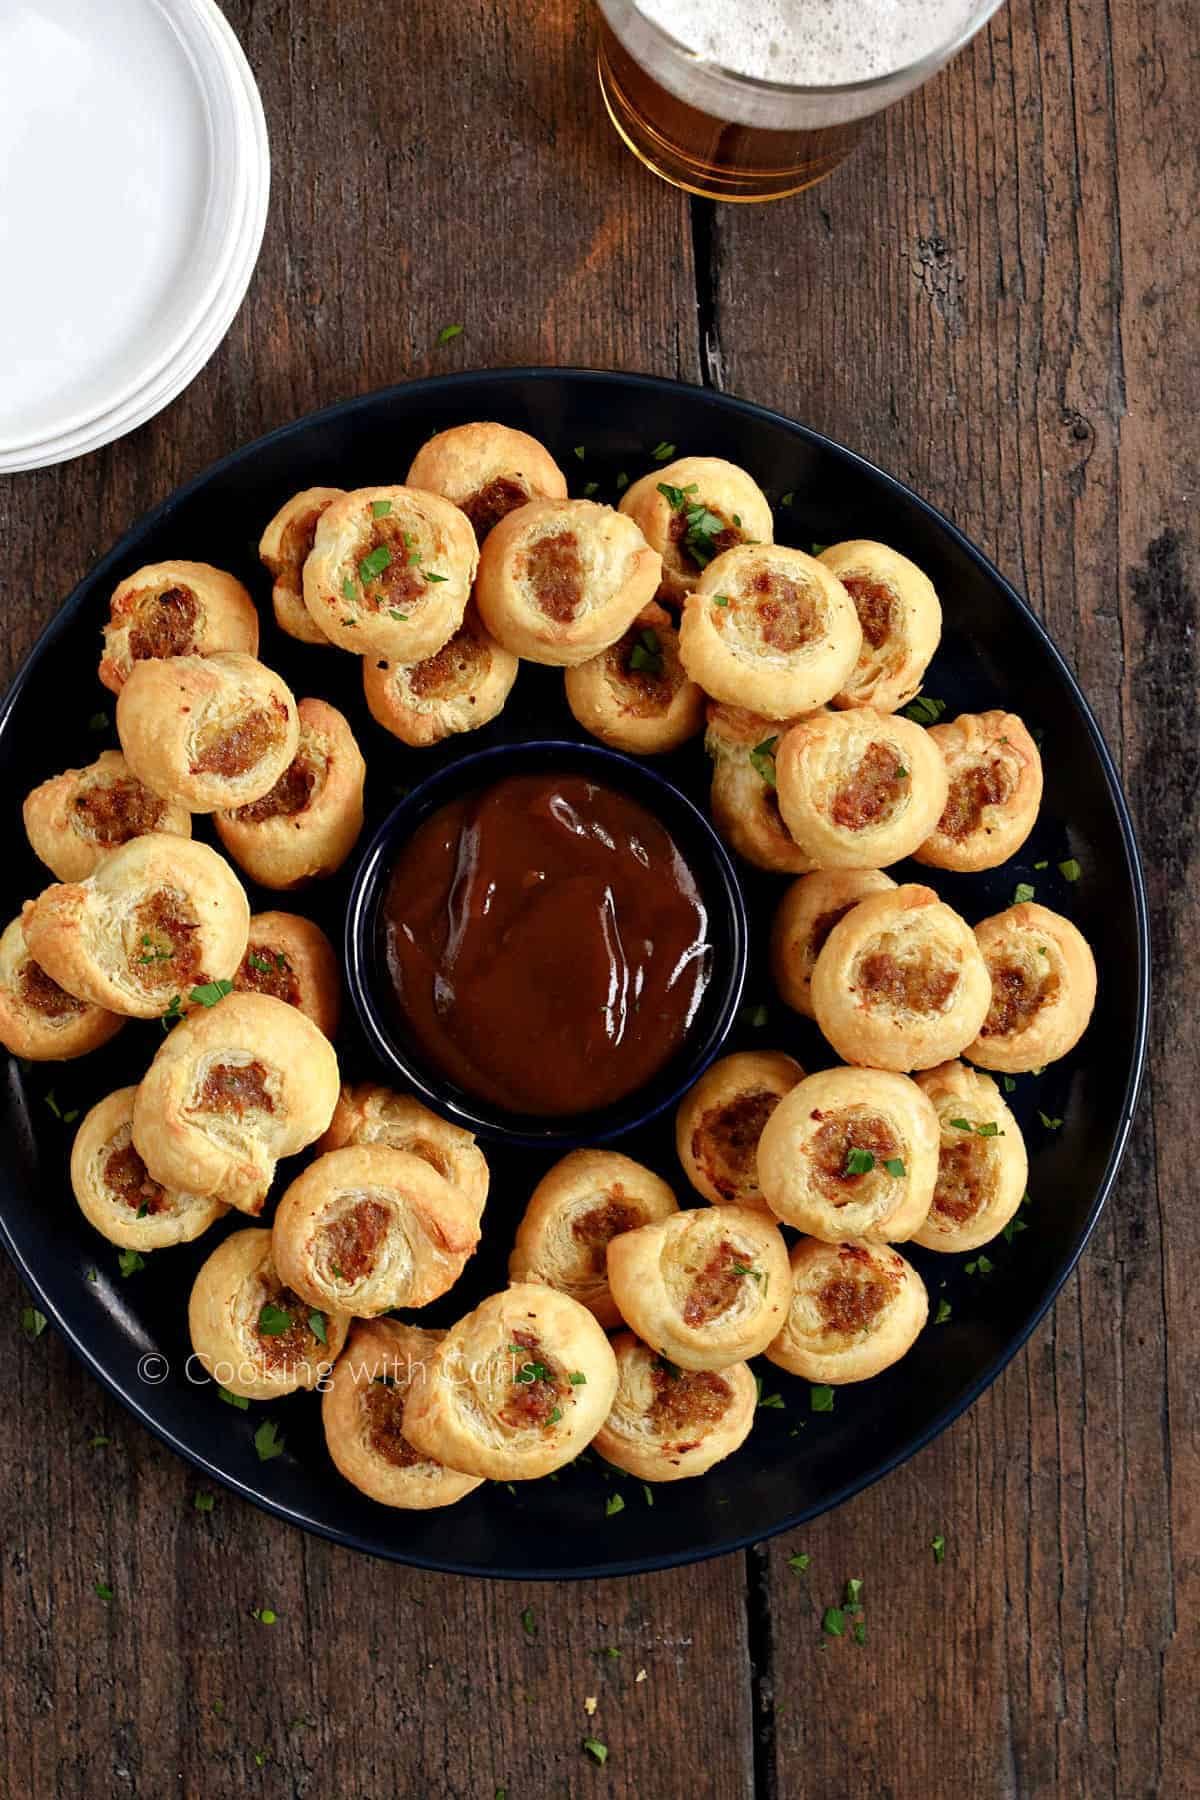 Looking down on a platter with stacks of Puff Pastry Sausage Bites. 